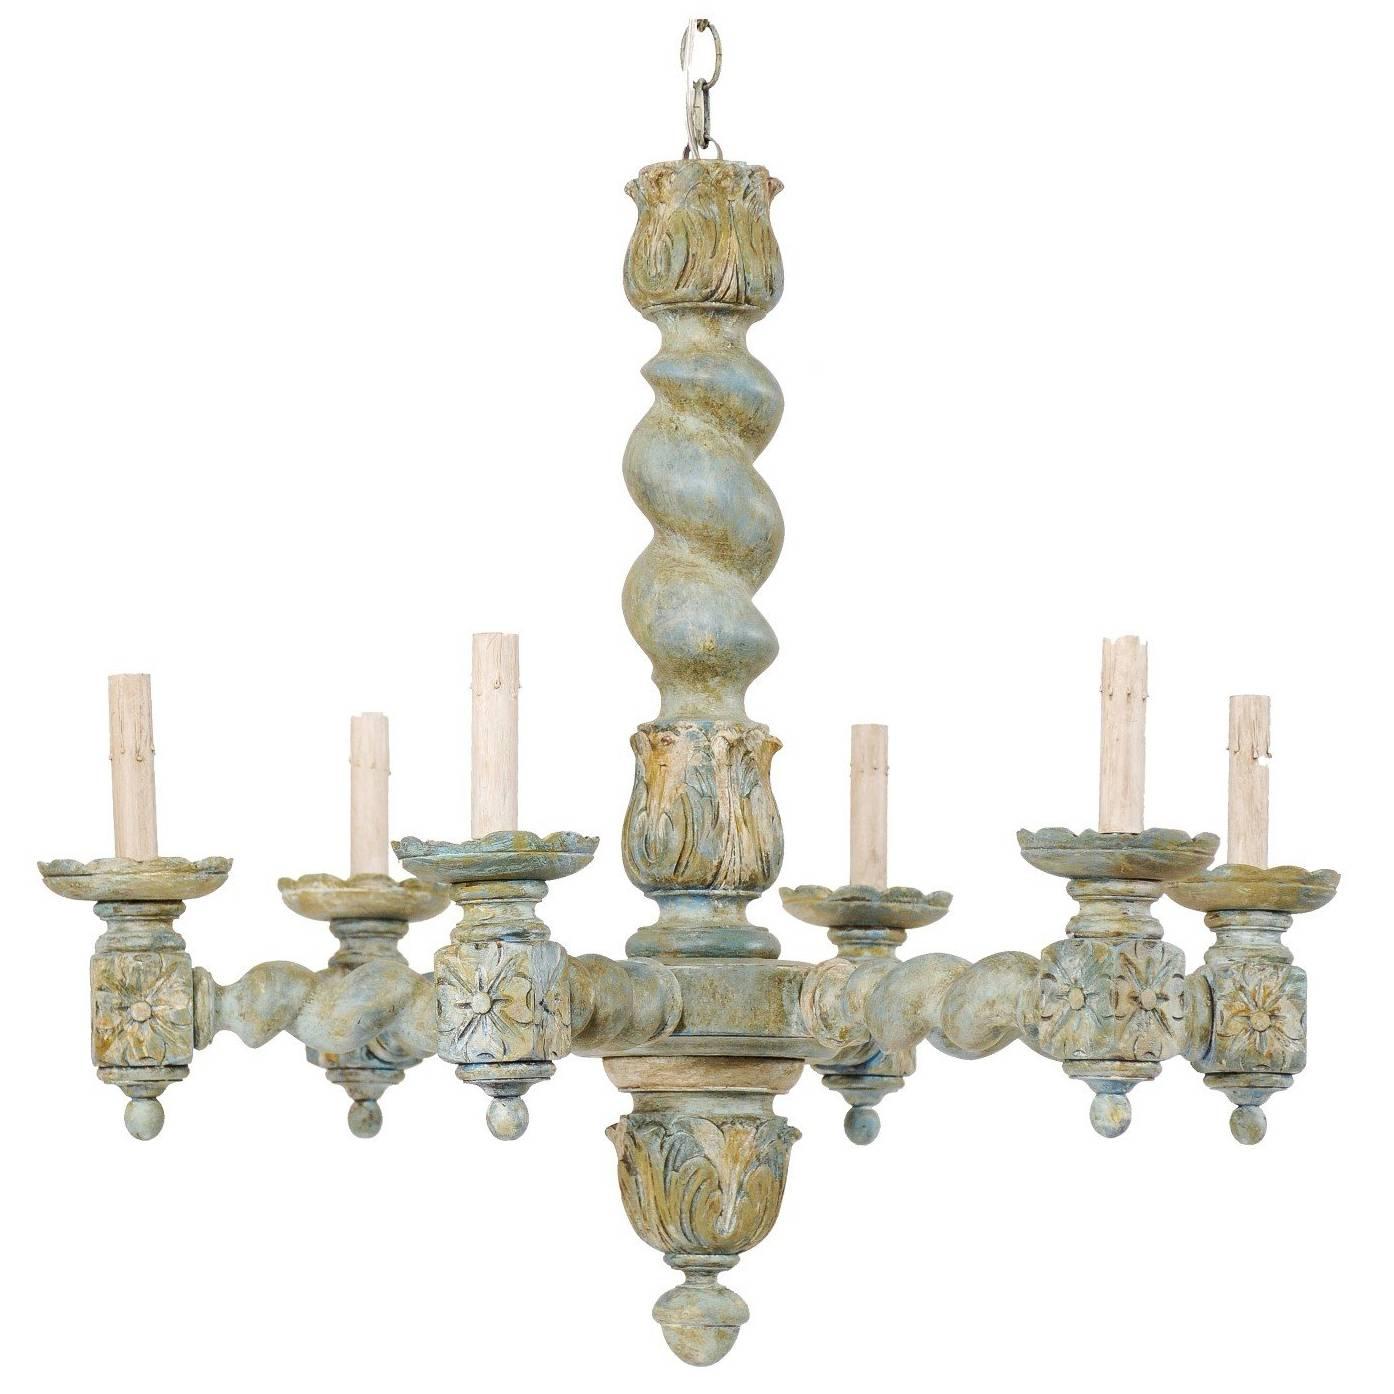 French Six-Light Barley Twist Wood Chandelier in Painted Tones of Blue and Cream